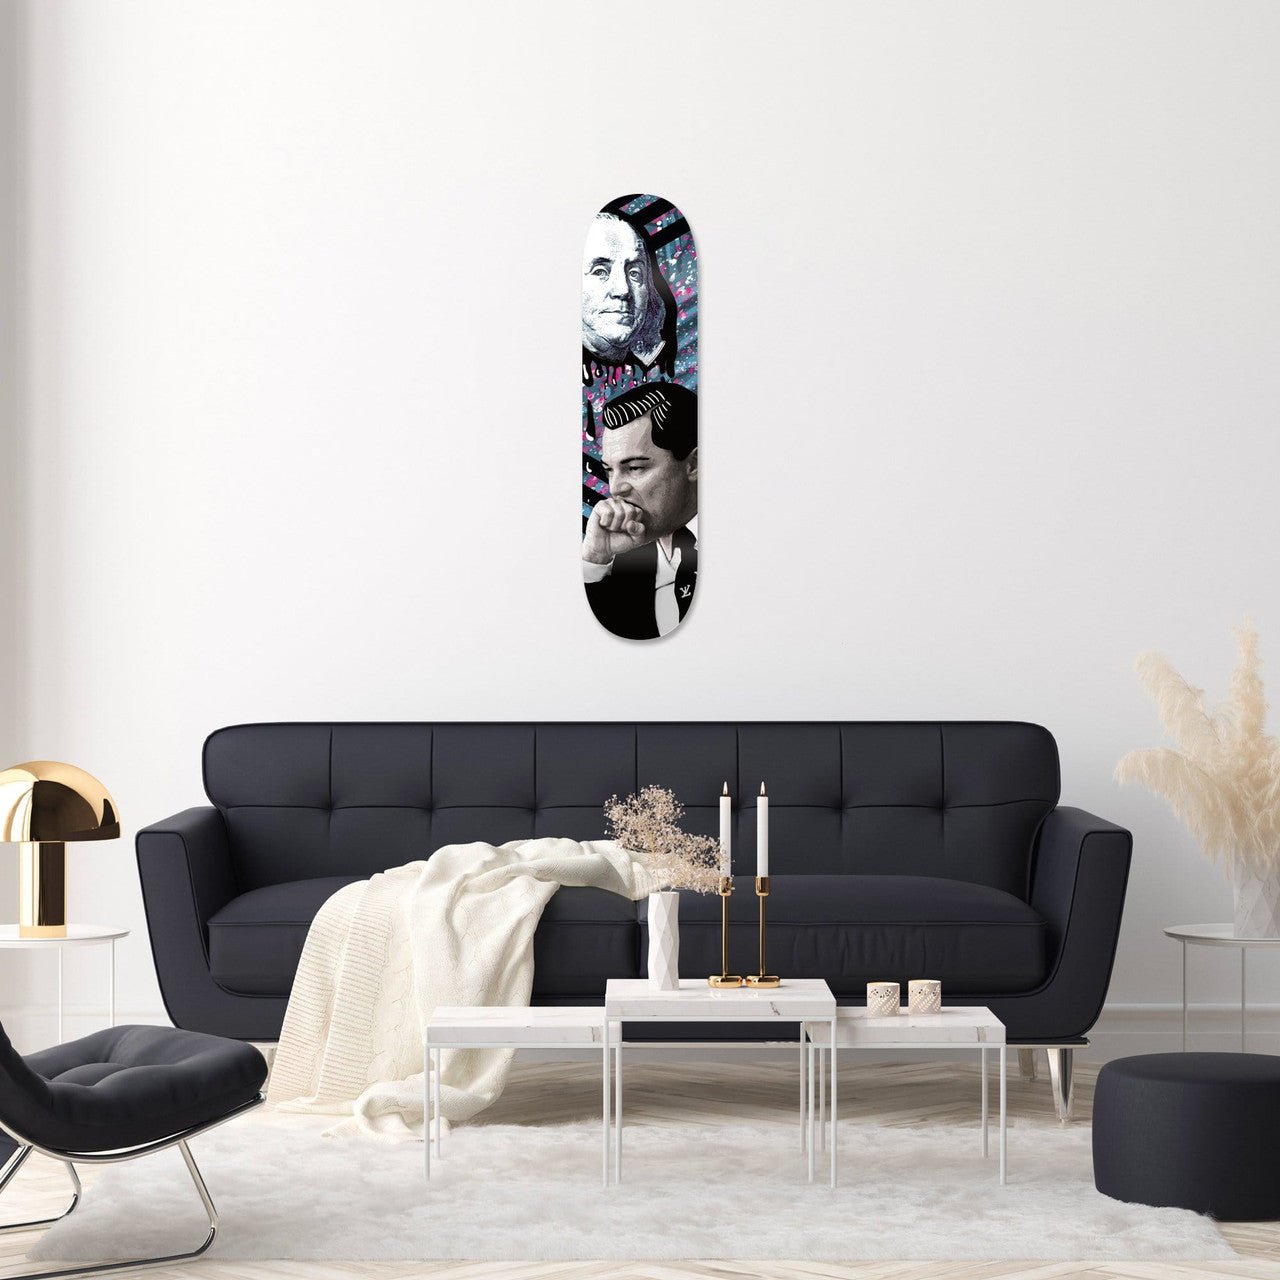 "The Wolf: Fist Bite" - Skateboard - The Art Lab Acrylic Glass Art - Skateboards, Surfboards & Glass Prints Wall Decor for your Home.